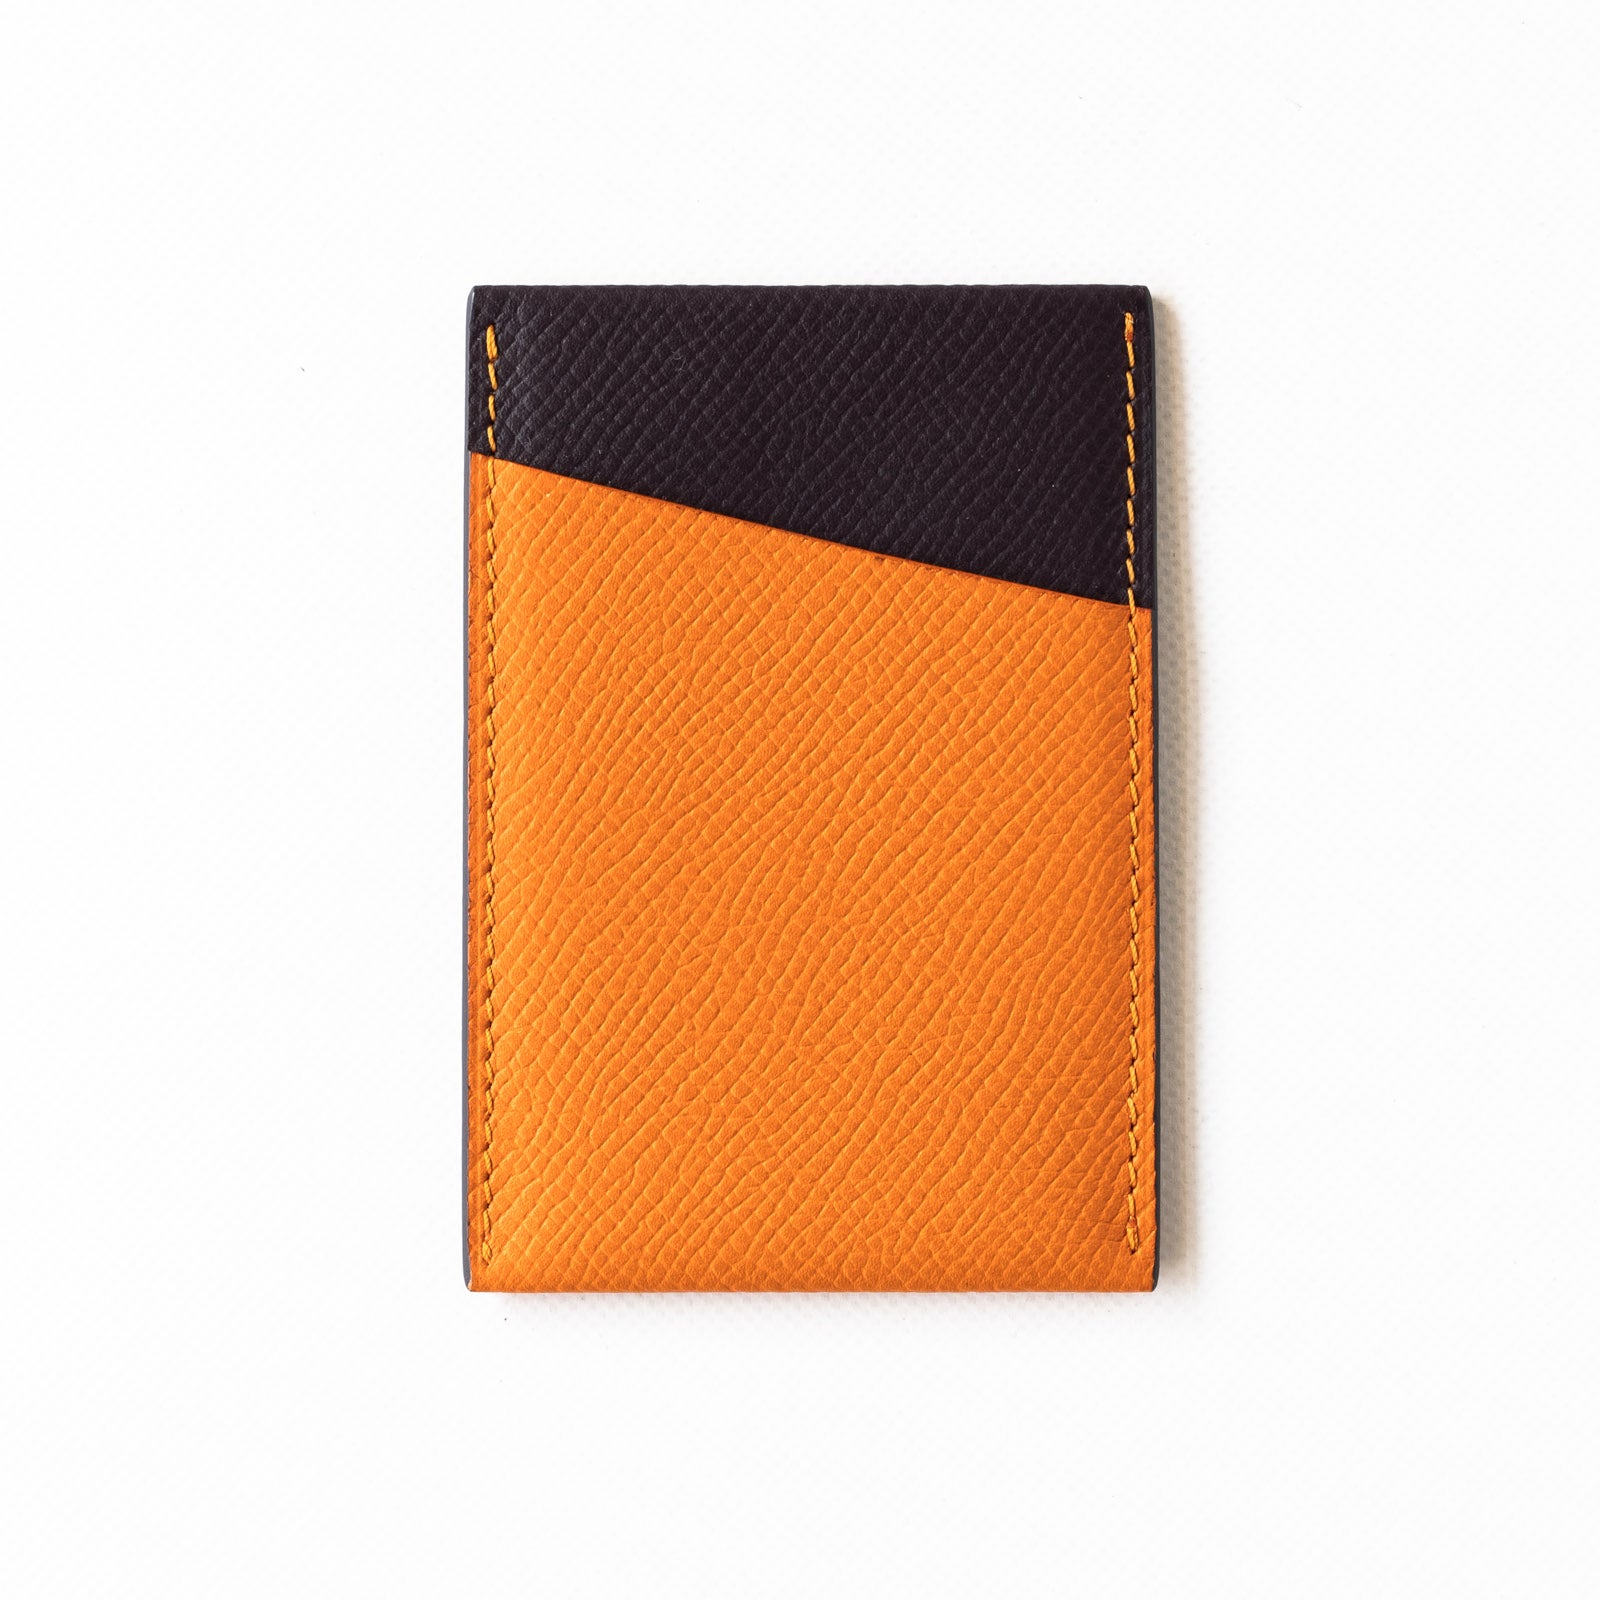 [6th Anniversary Special] Bicolor Pass Case Veau Epsom